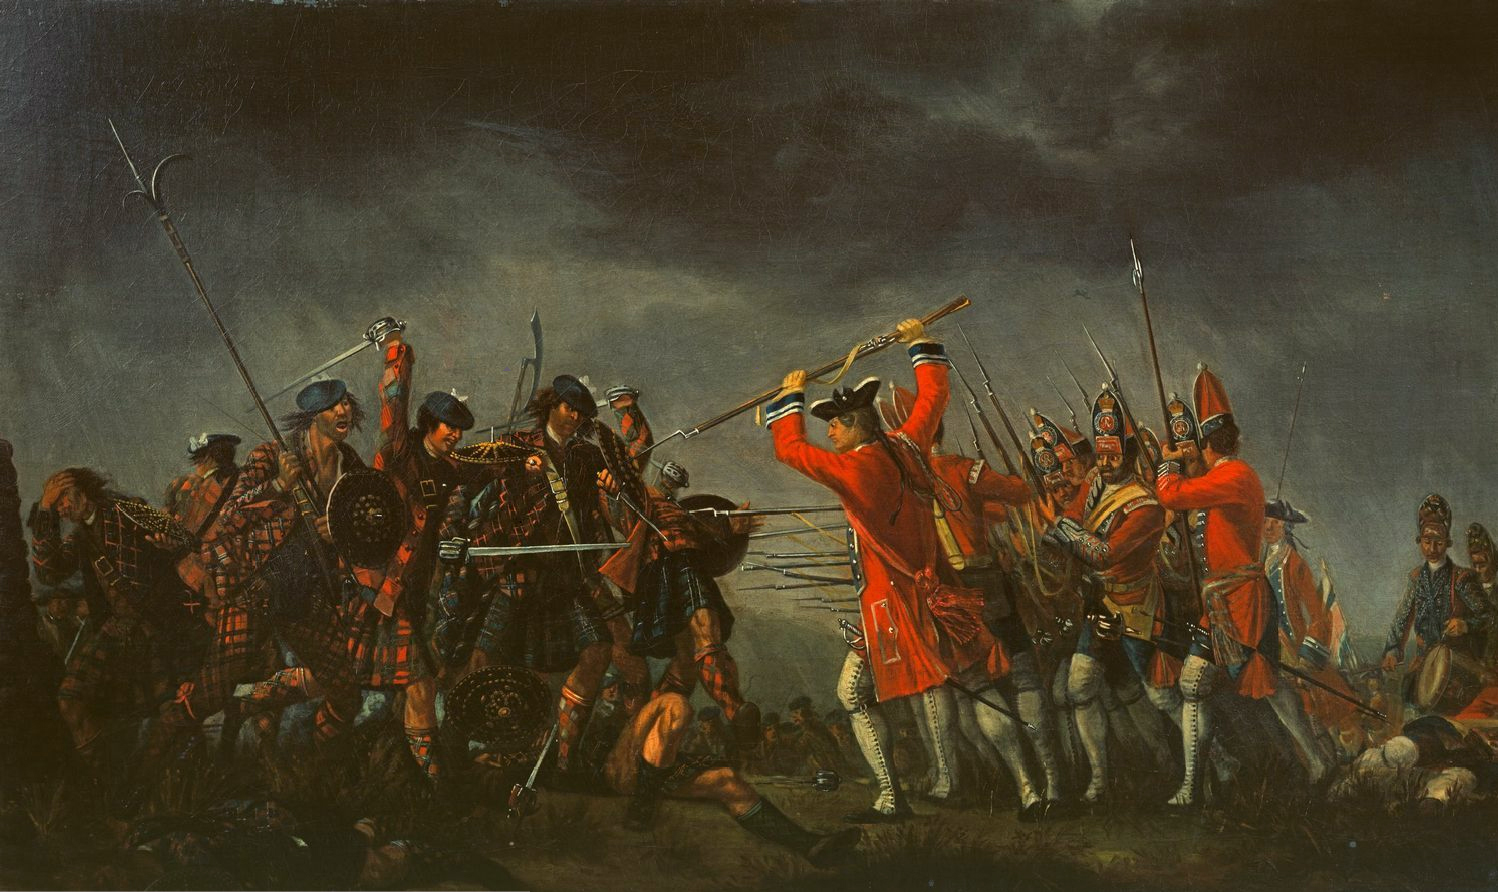 The Jacobite Uprising of 1745 ended in a disastrous defeat for the Scots at the Battle of Culloden on April 16, 1746.  The aftermath of the battle  prompted the exodus of many Scots to America.  In time they embraced their American identity, but their Scottish heritage greatly enriched their new nation.  In the same way, Ephraimites of all nations will enrich Israel with what they bring from the lands of their sojourn.  (The Battle of Culloden, by David Morier)